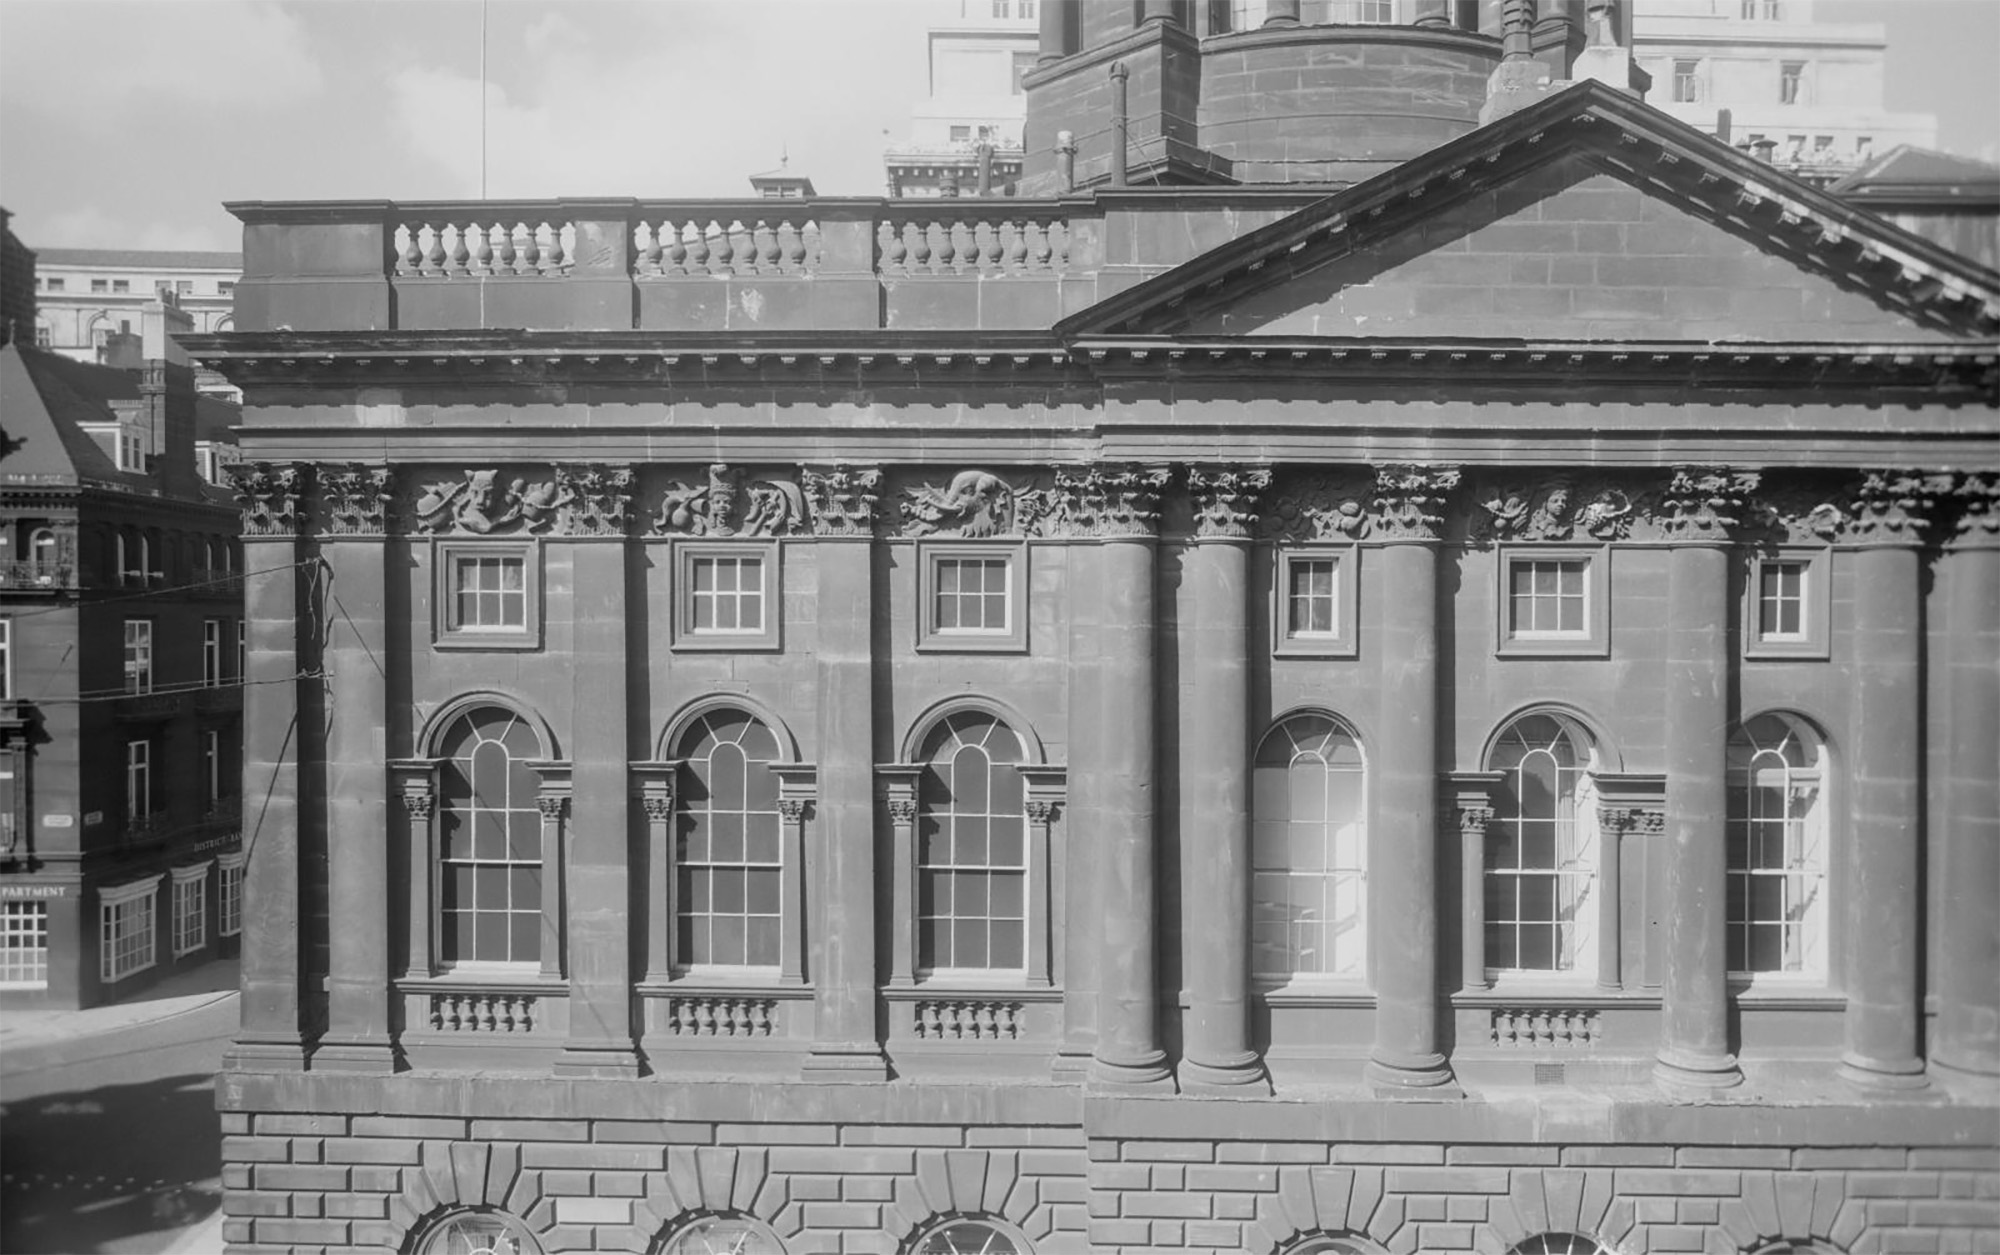 A black and white archive photograph of the exterior facade of Liverpool Town Hall.